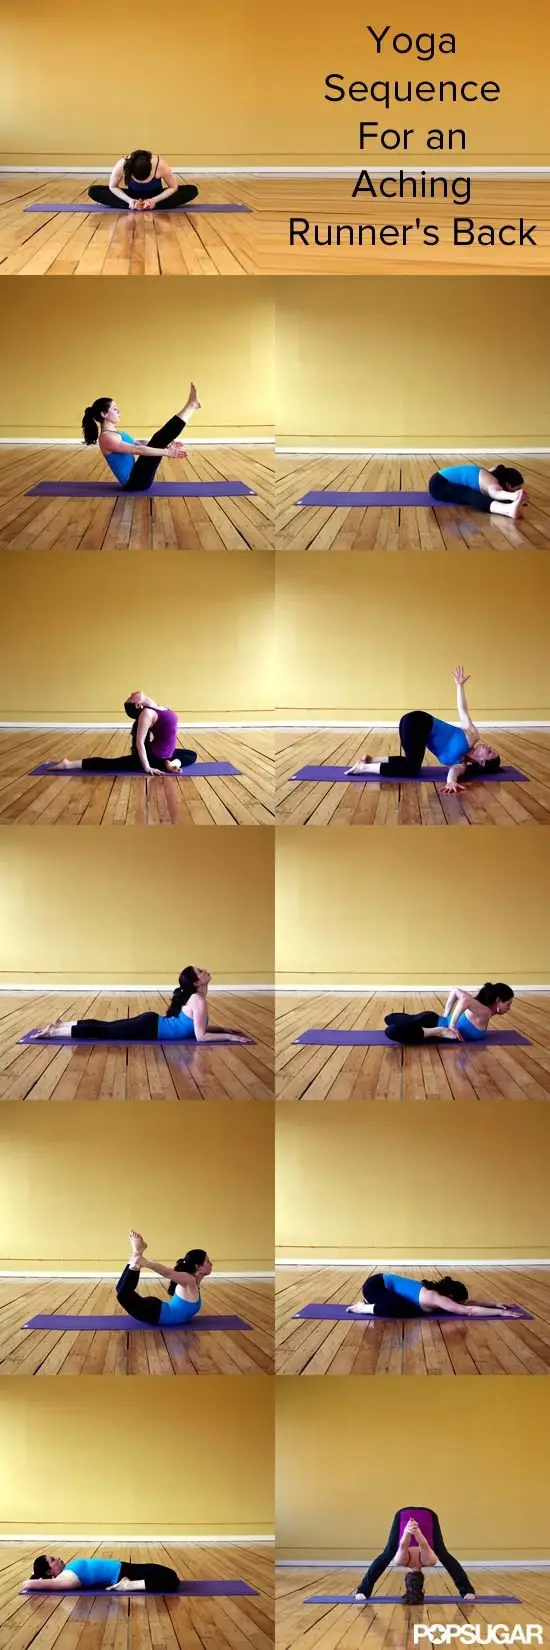 Yoga Sequence for an Aching Runner's Back